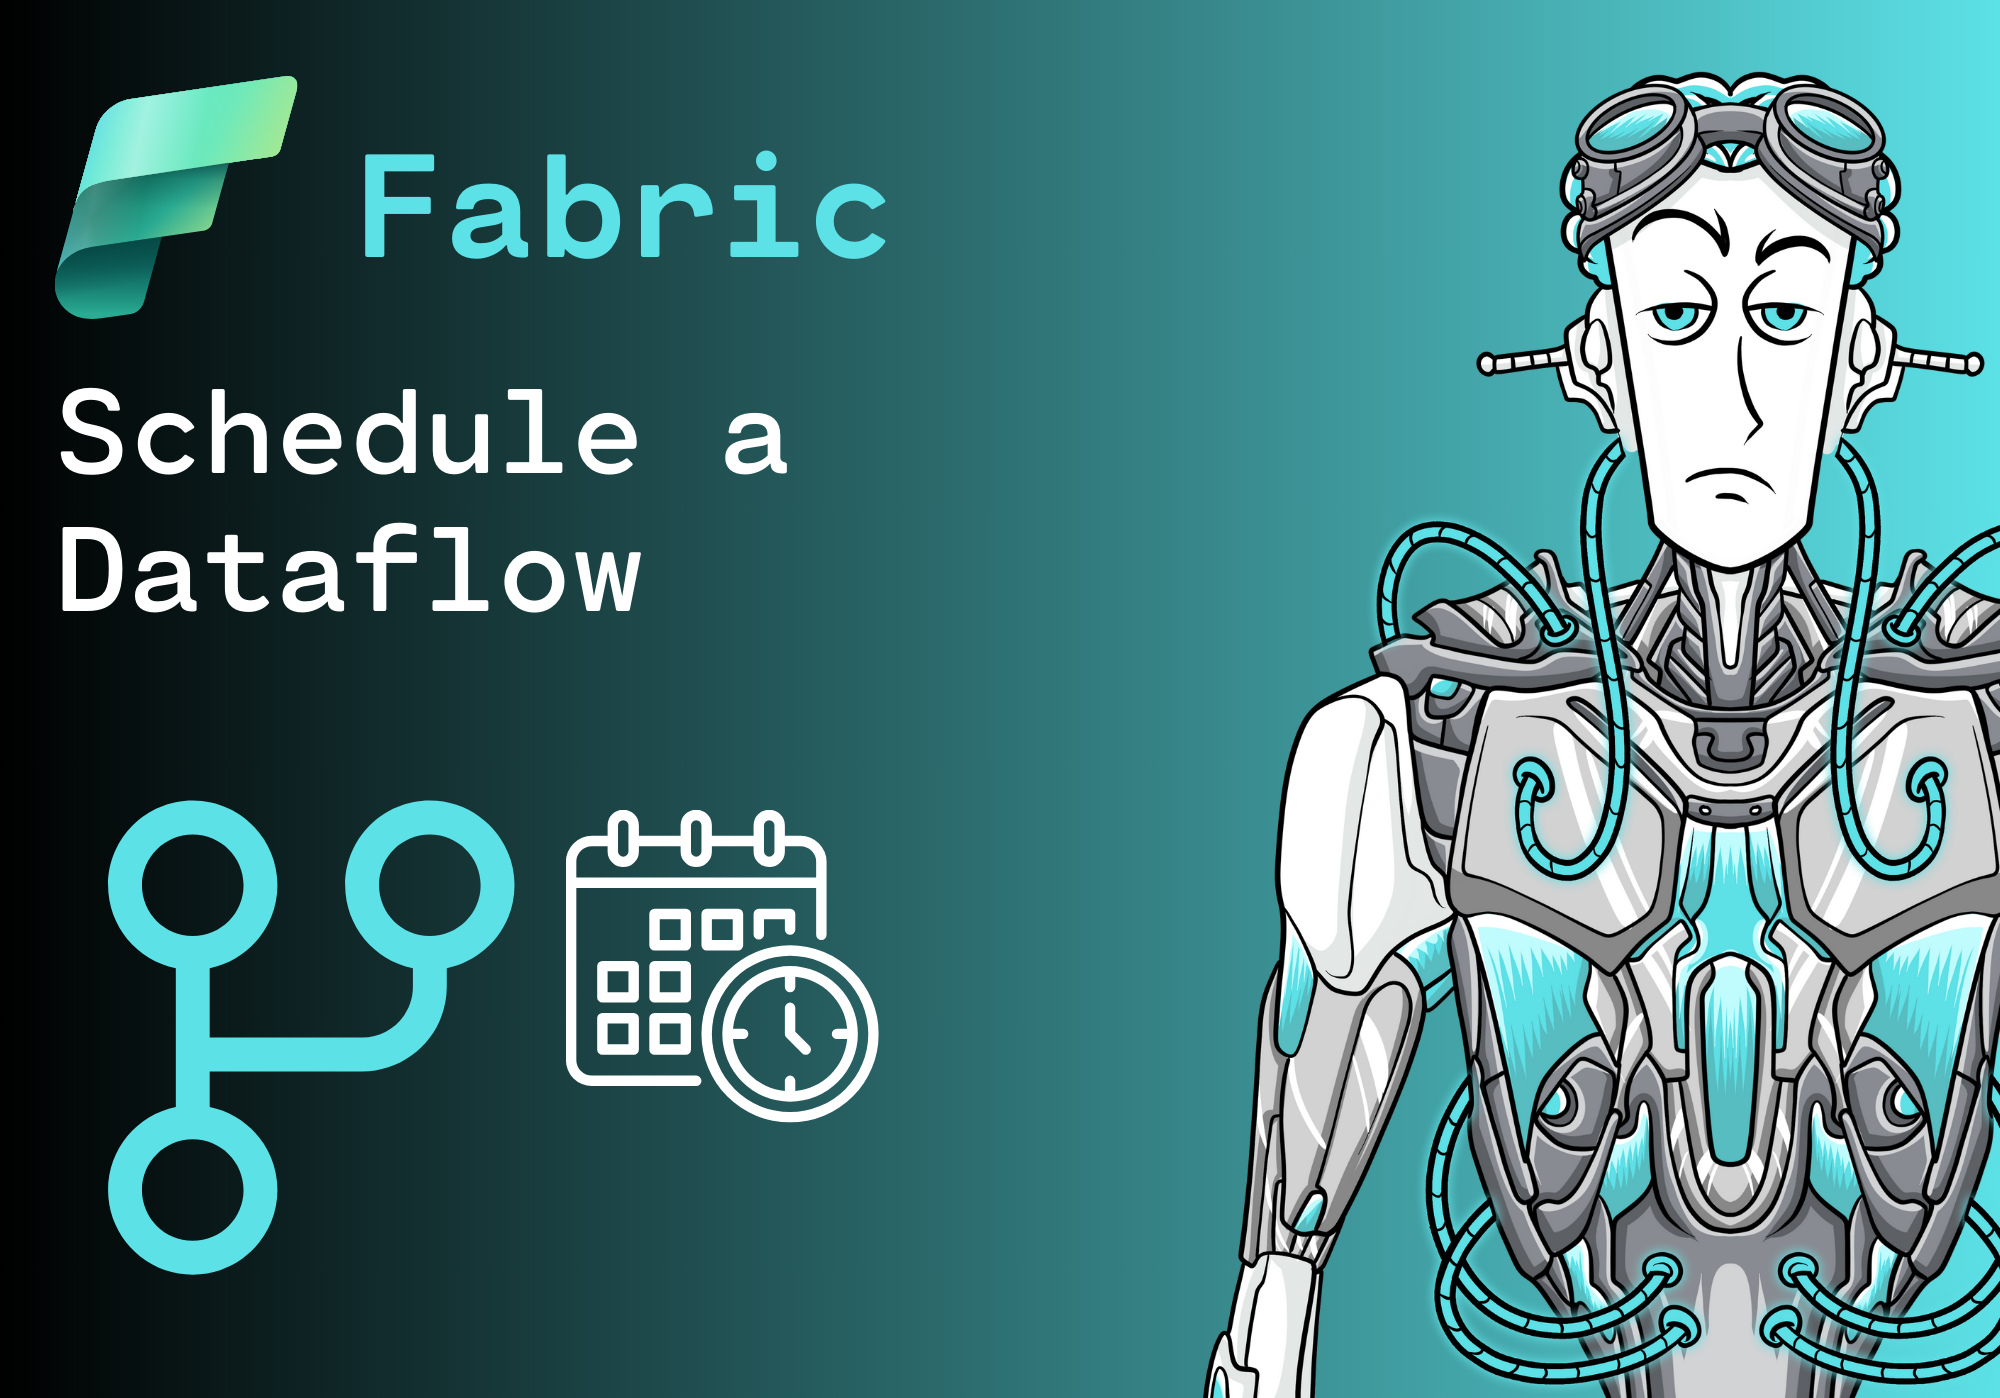 How to schedule a Dataflow in Fabric